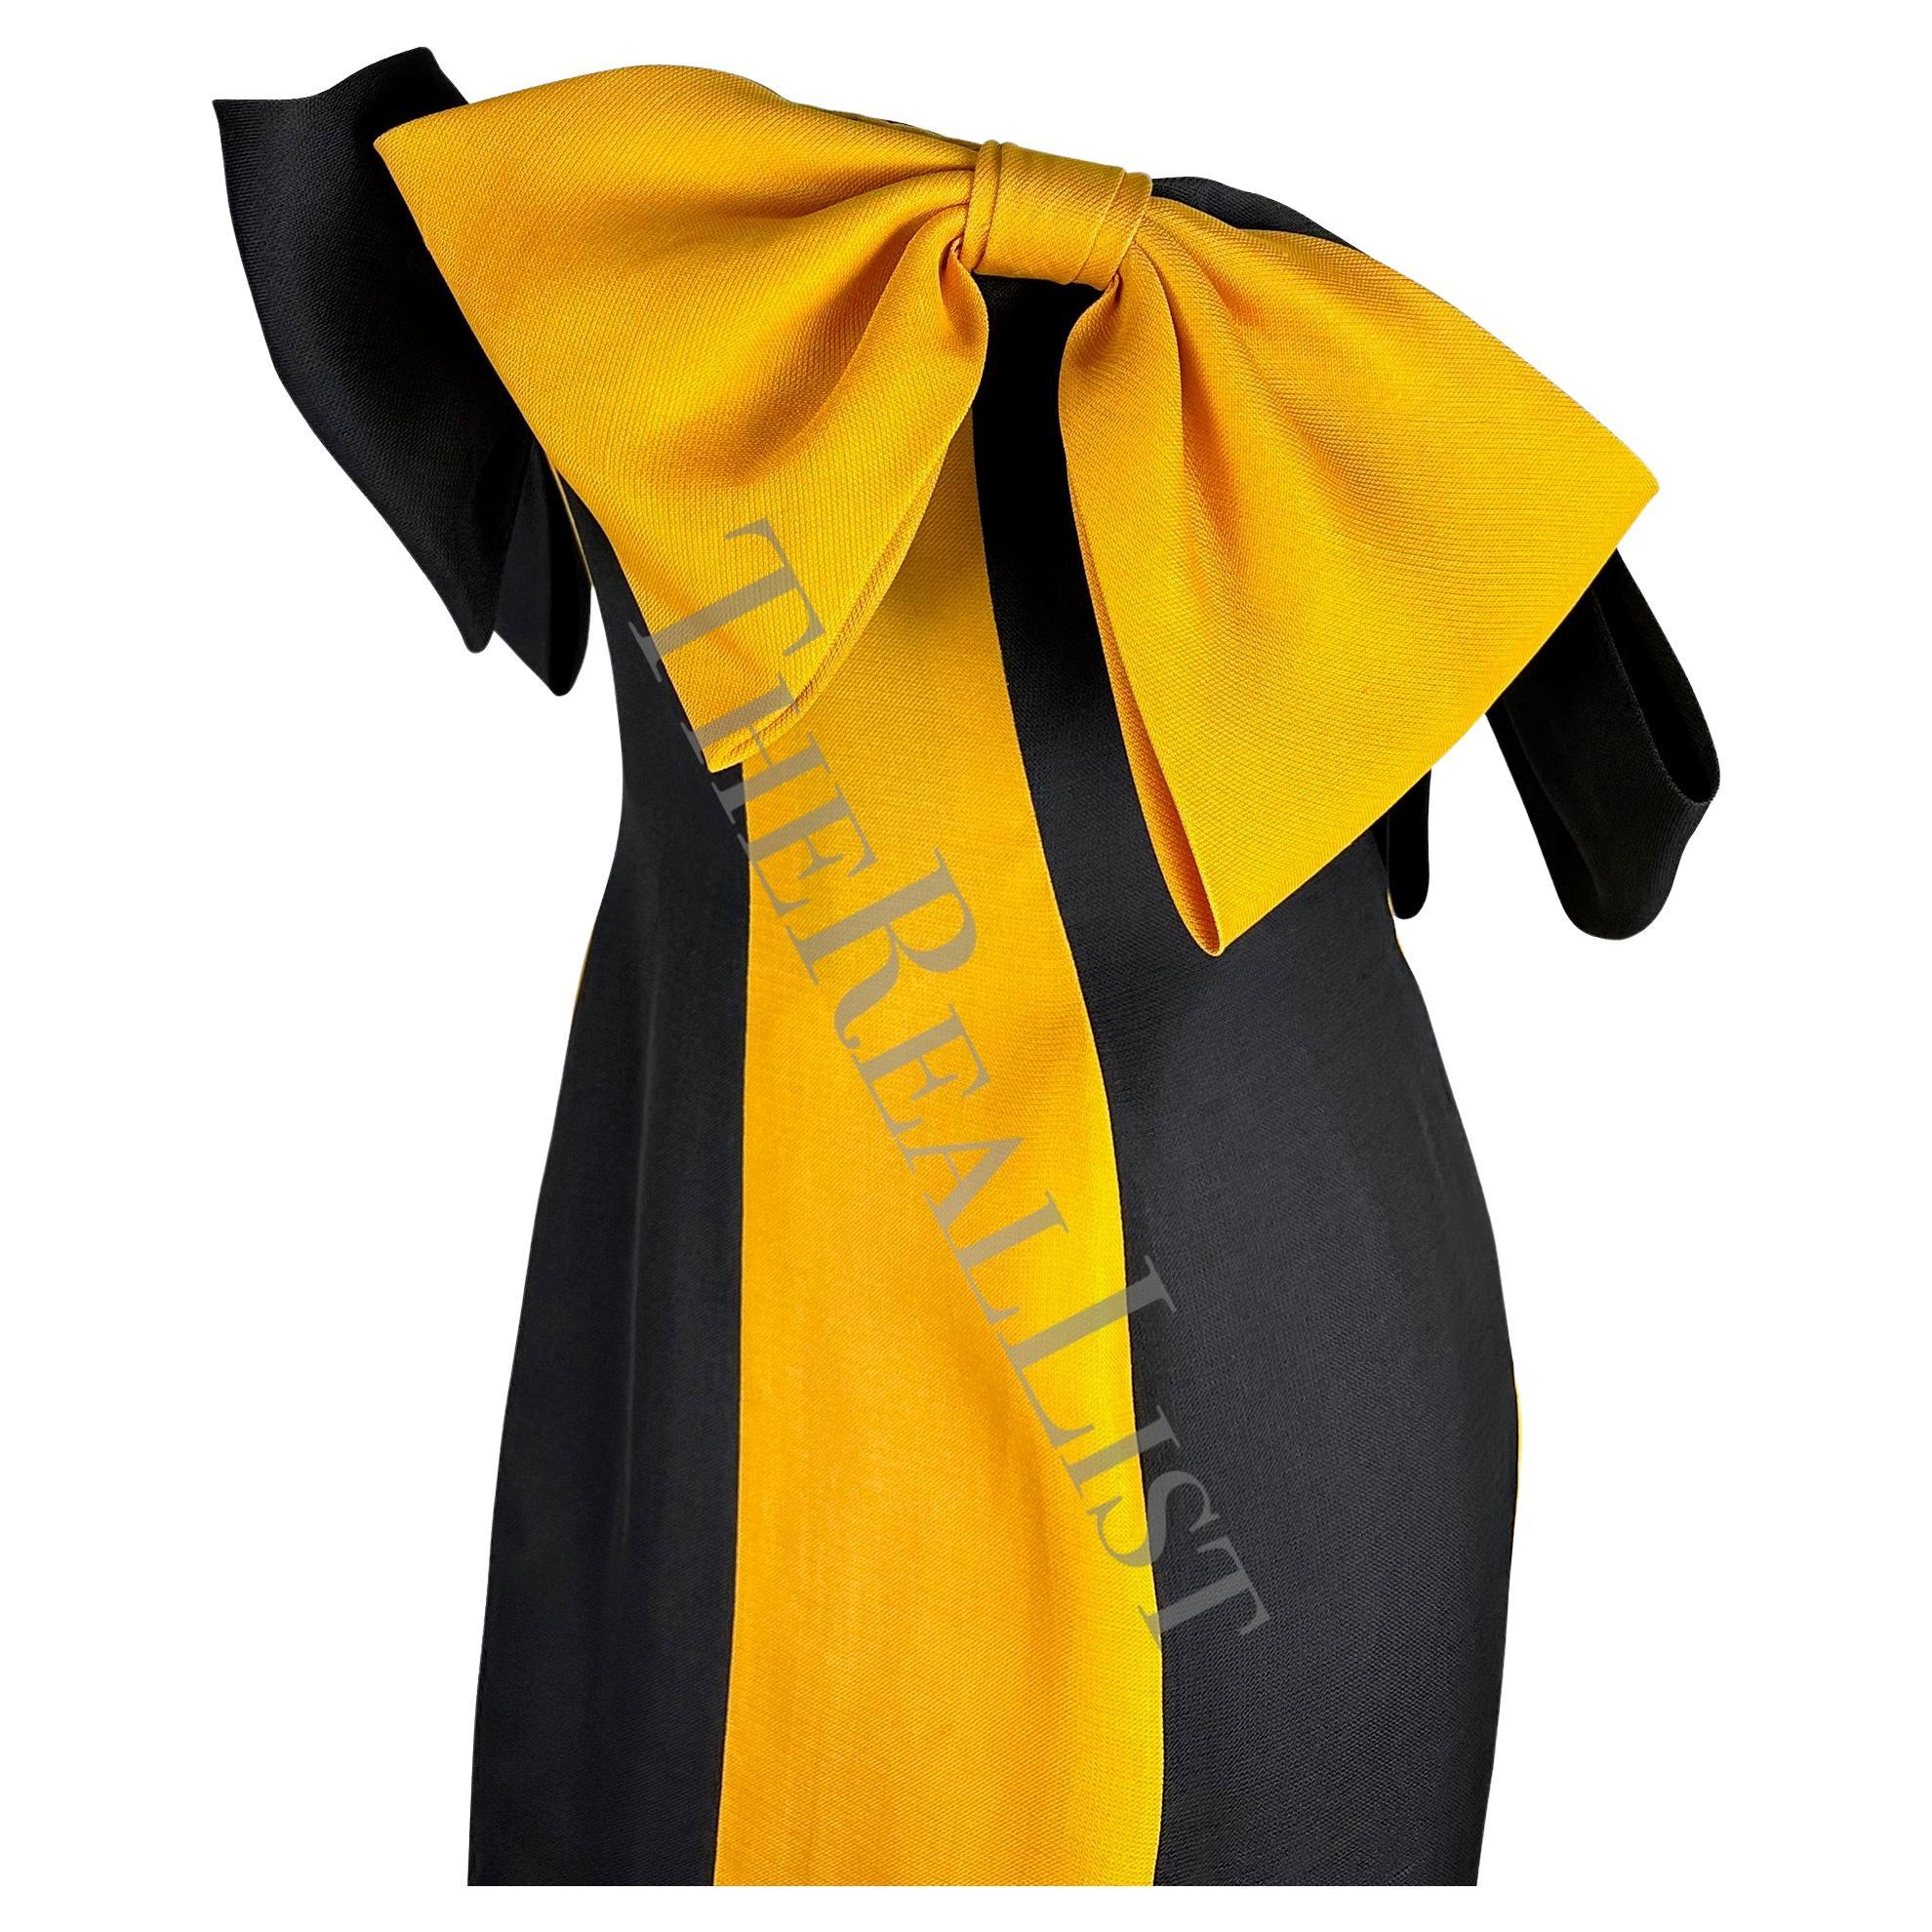 S/S 1987 Givenchy Haute Couture Runway Yellow Black Bow Trumpet Flare Gown For Sale 2